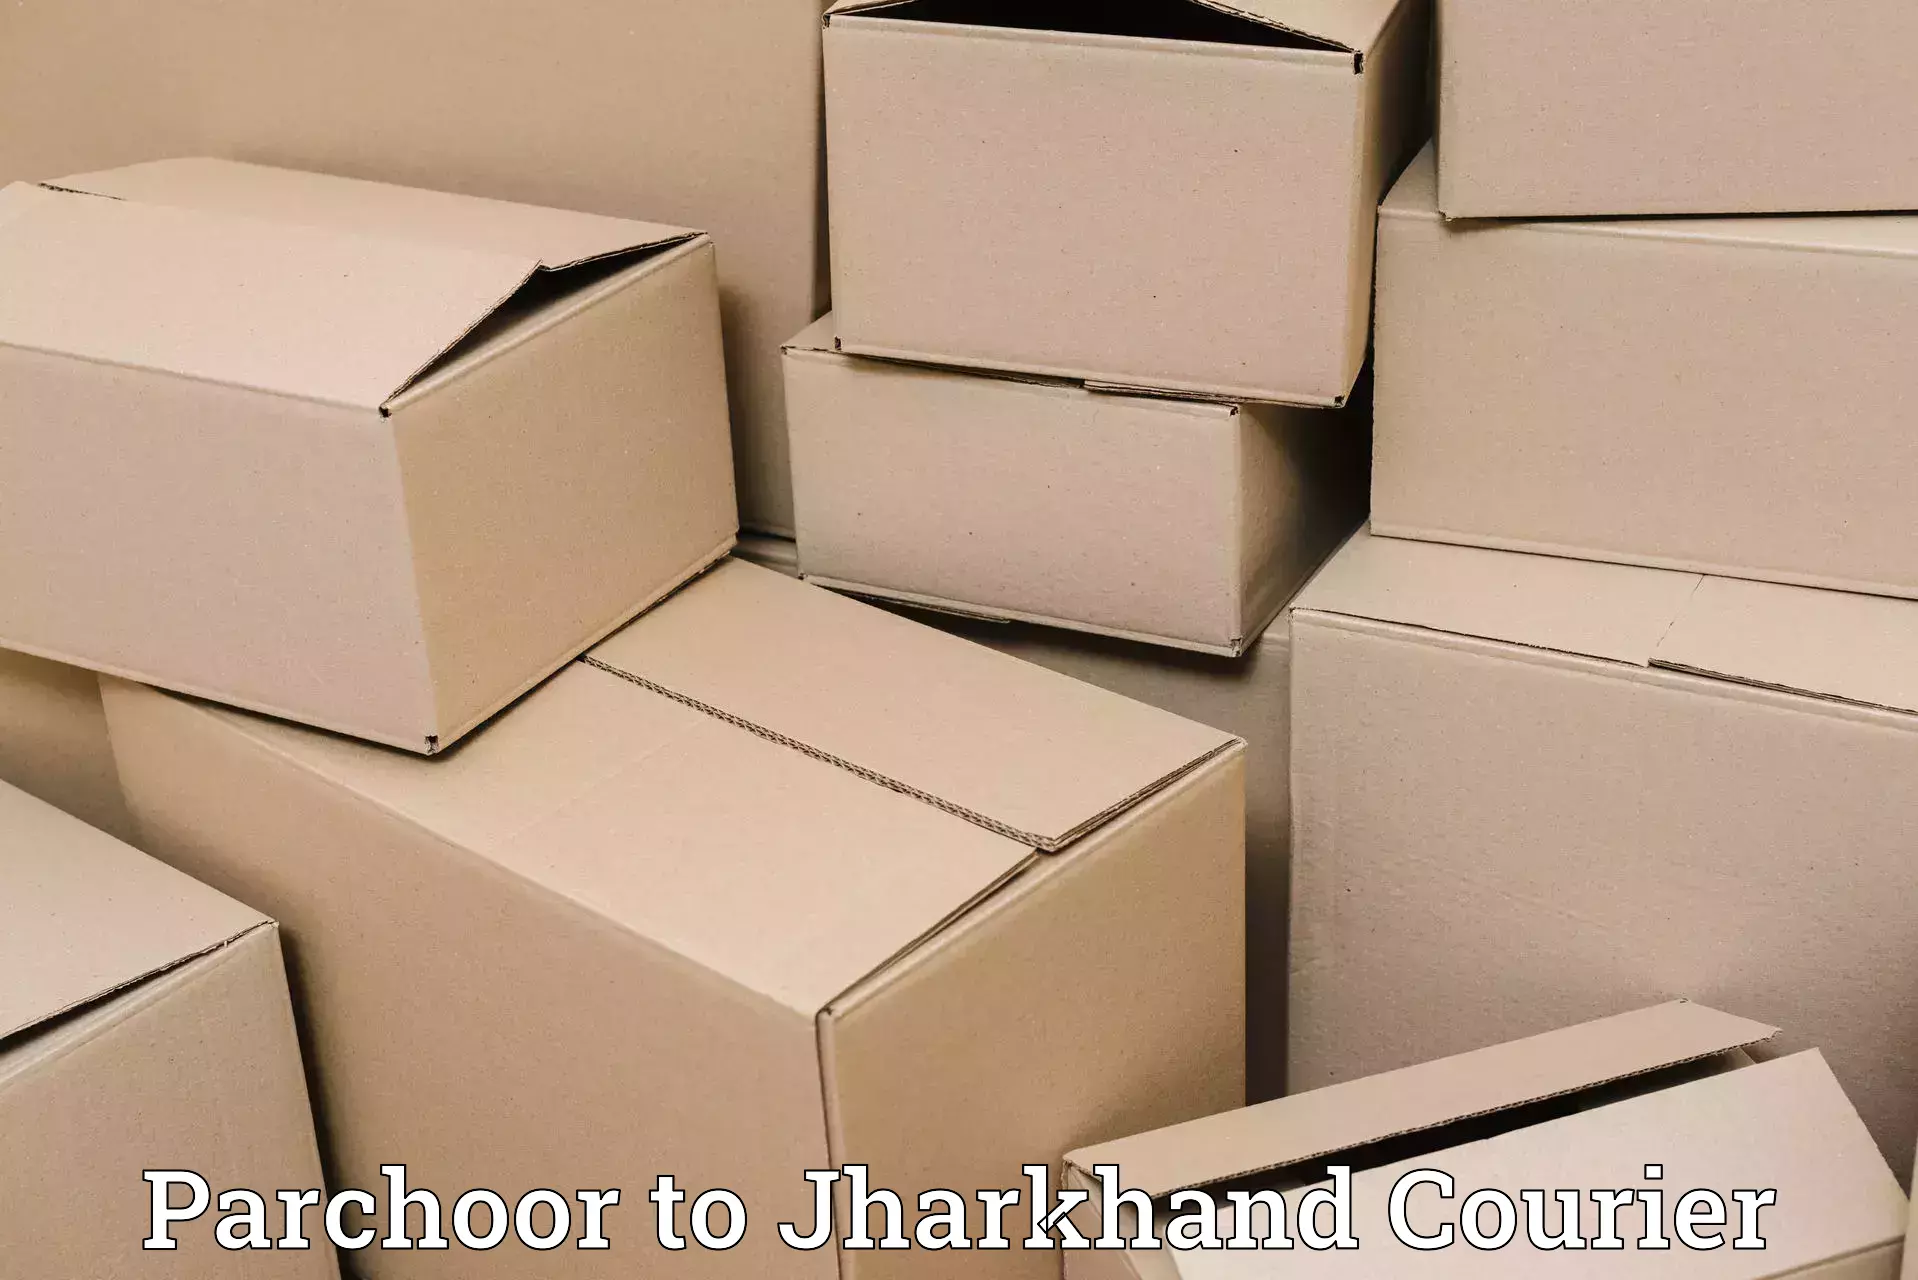 Domestic delivery options in Parchoor to Deoghar